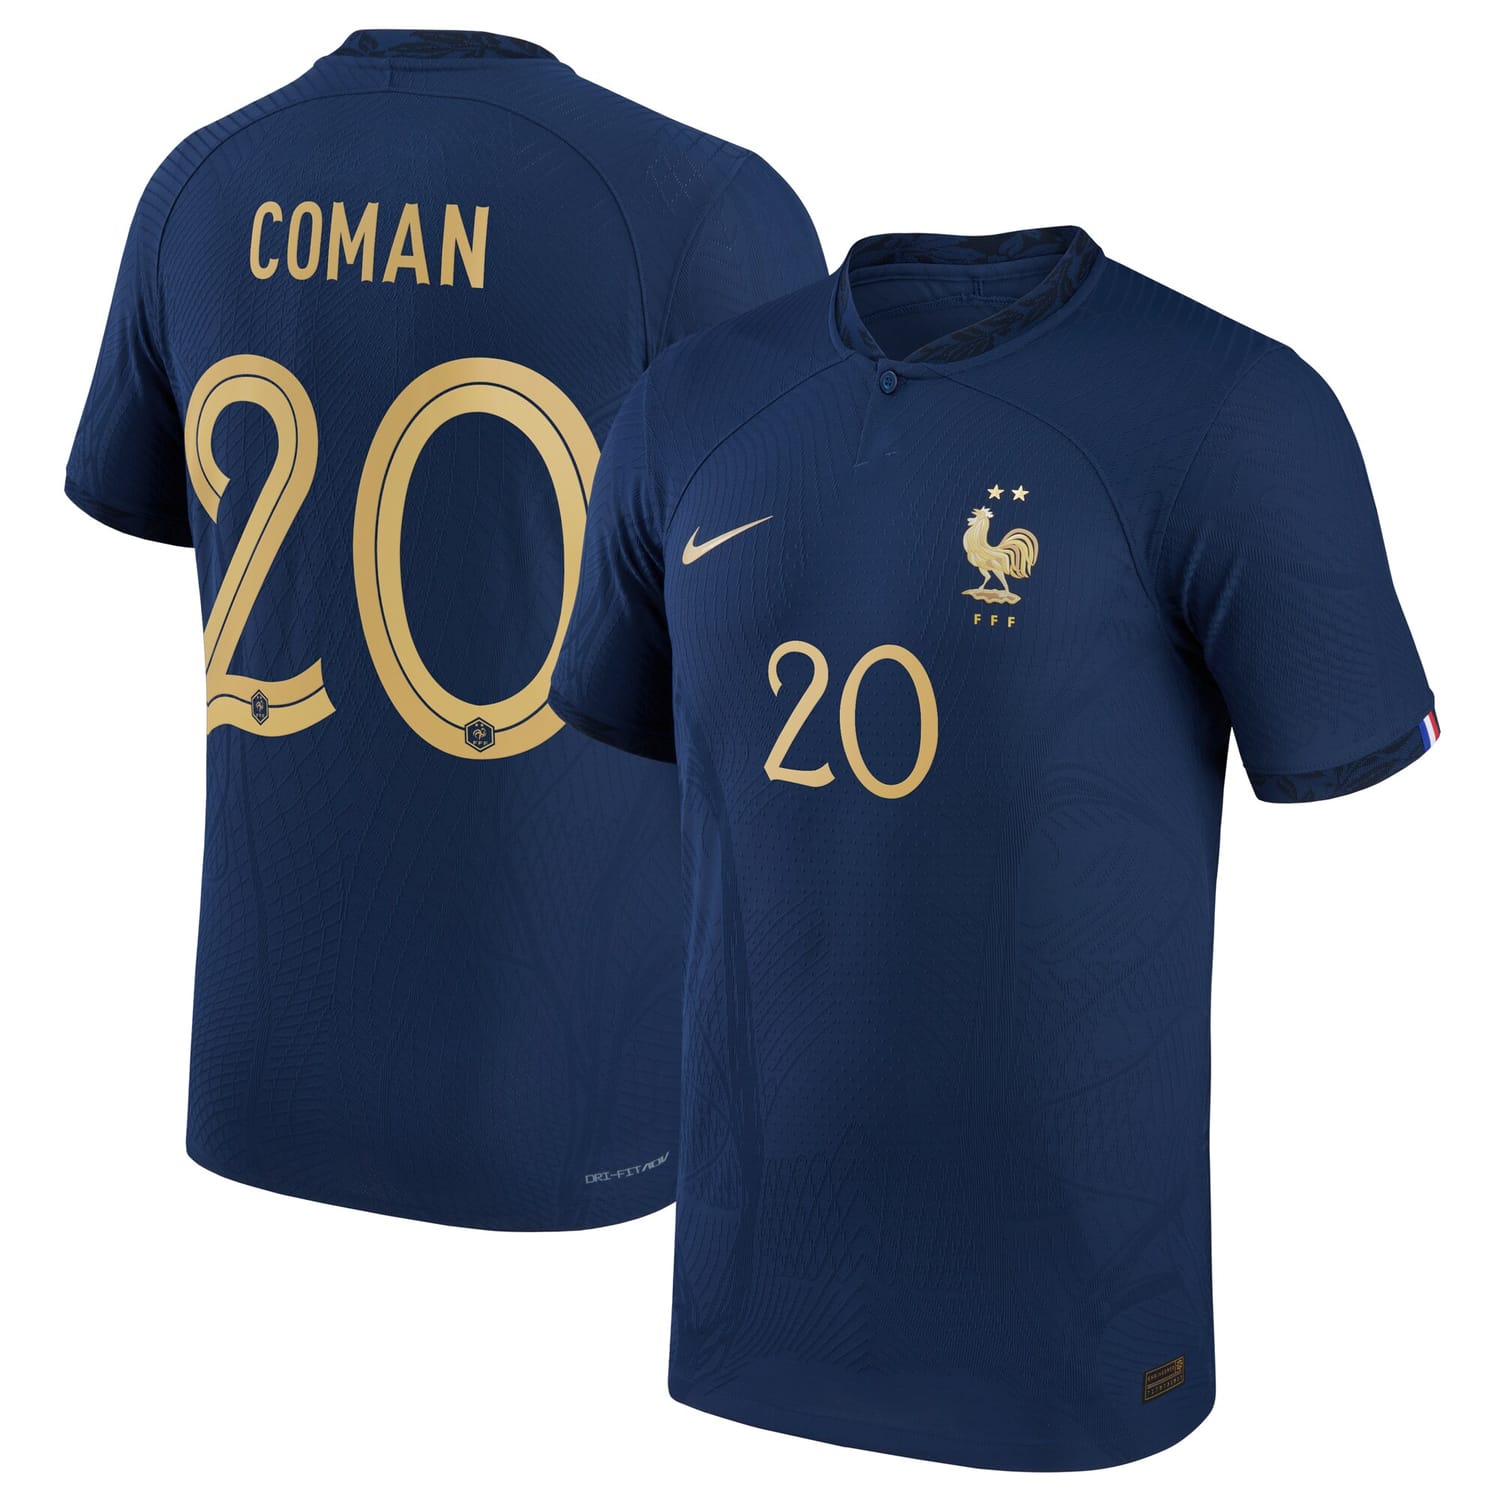 France National Team Home Authentic Jersey Shirt 2022 player Kingsley Coman 20 printing for Men